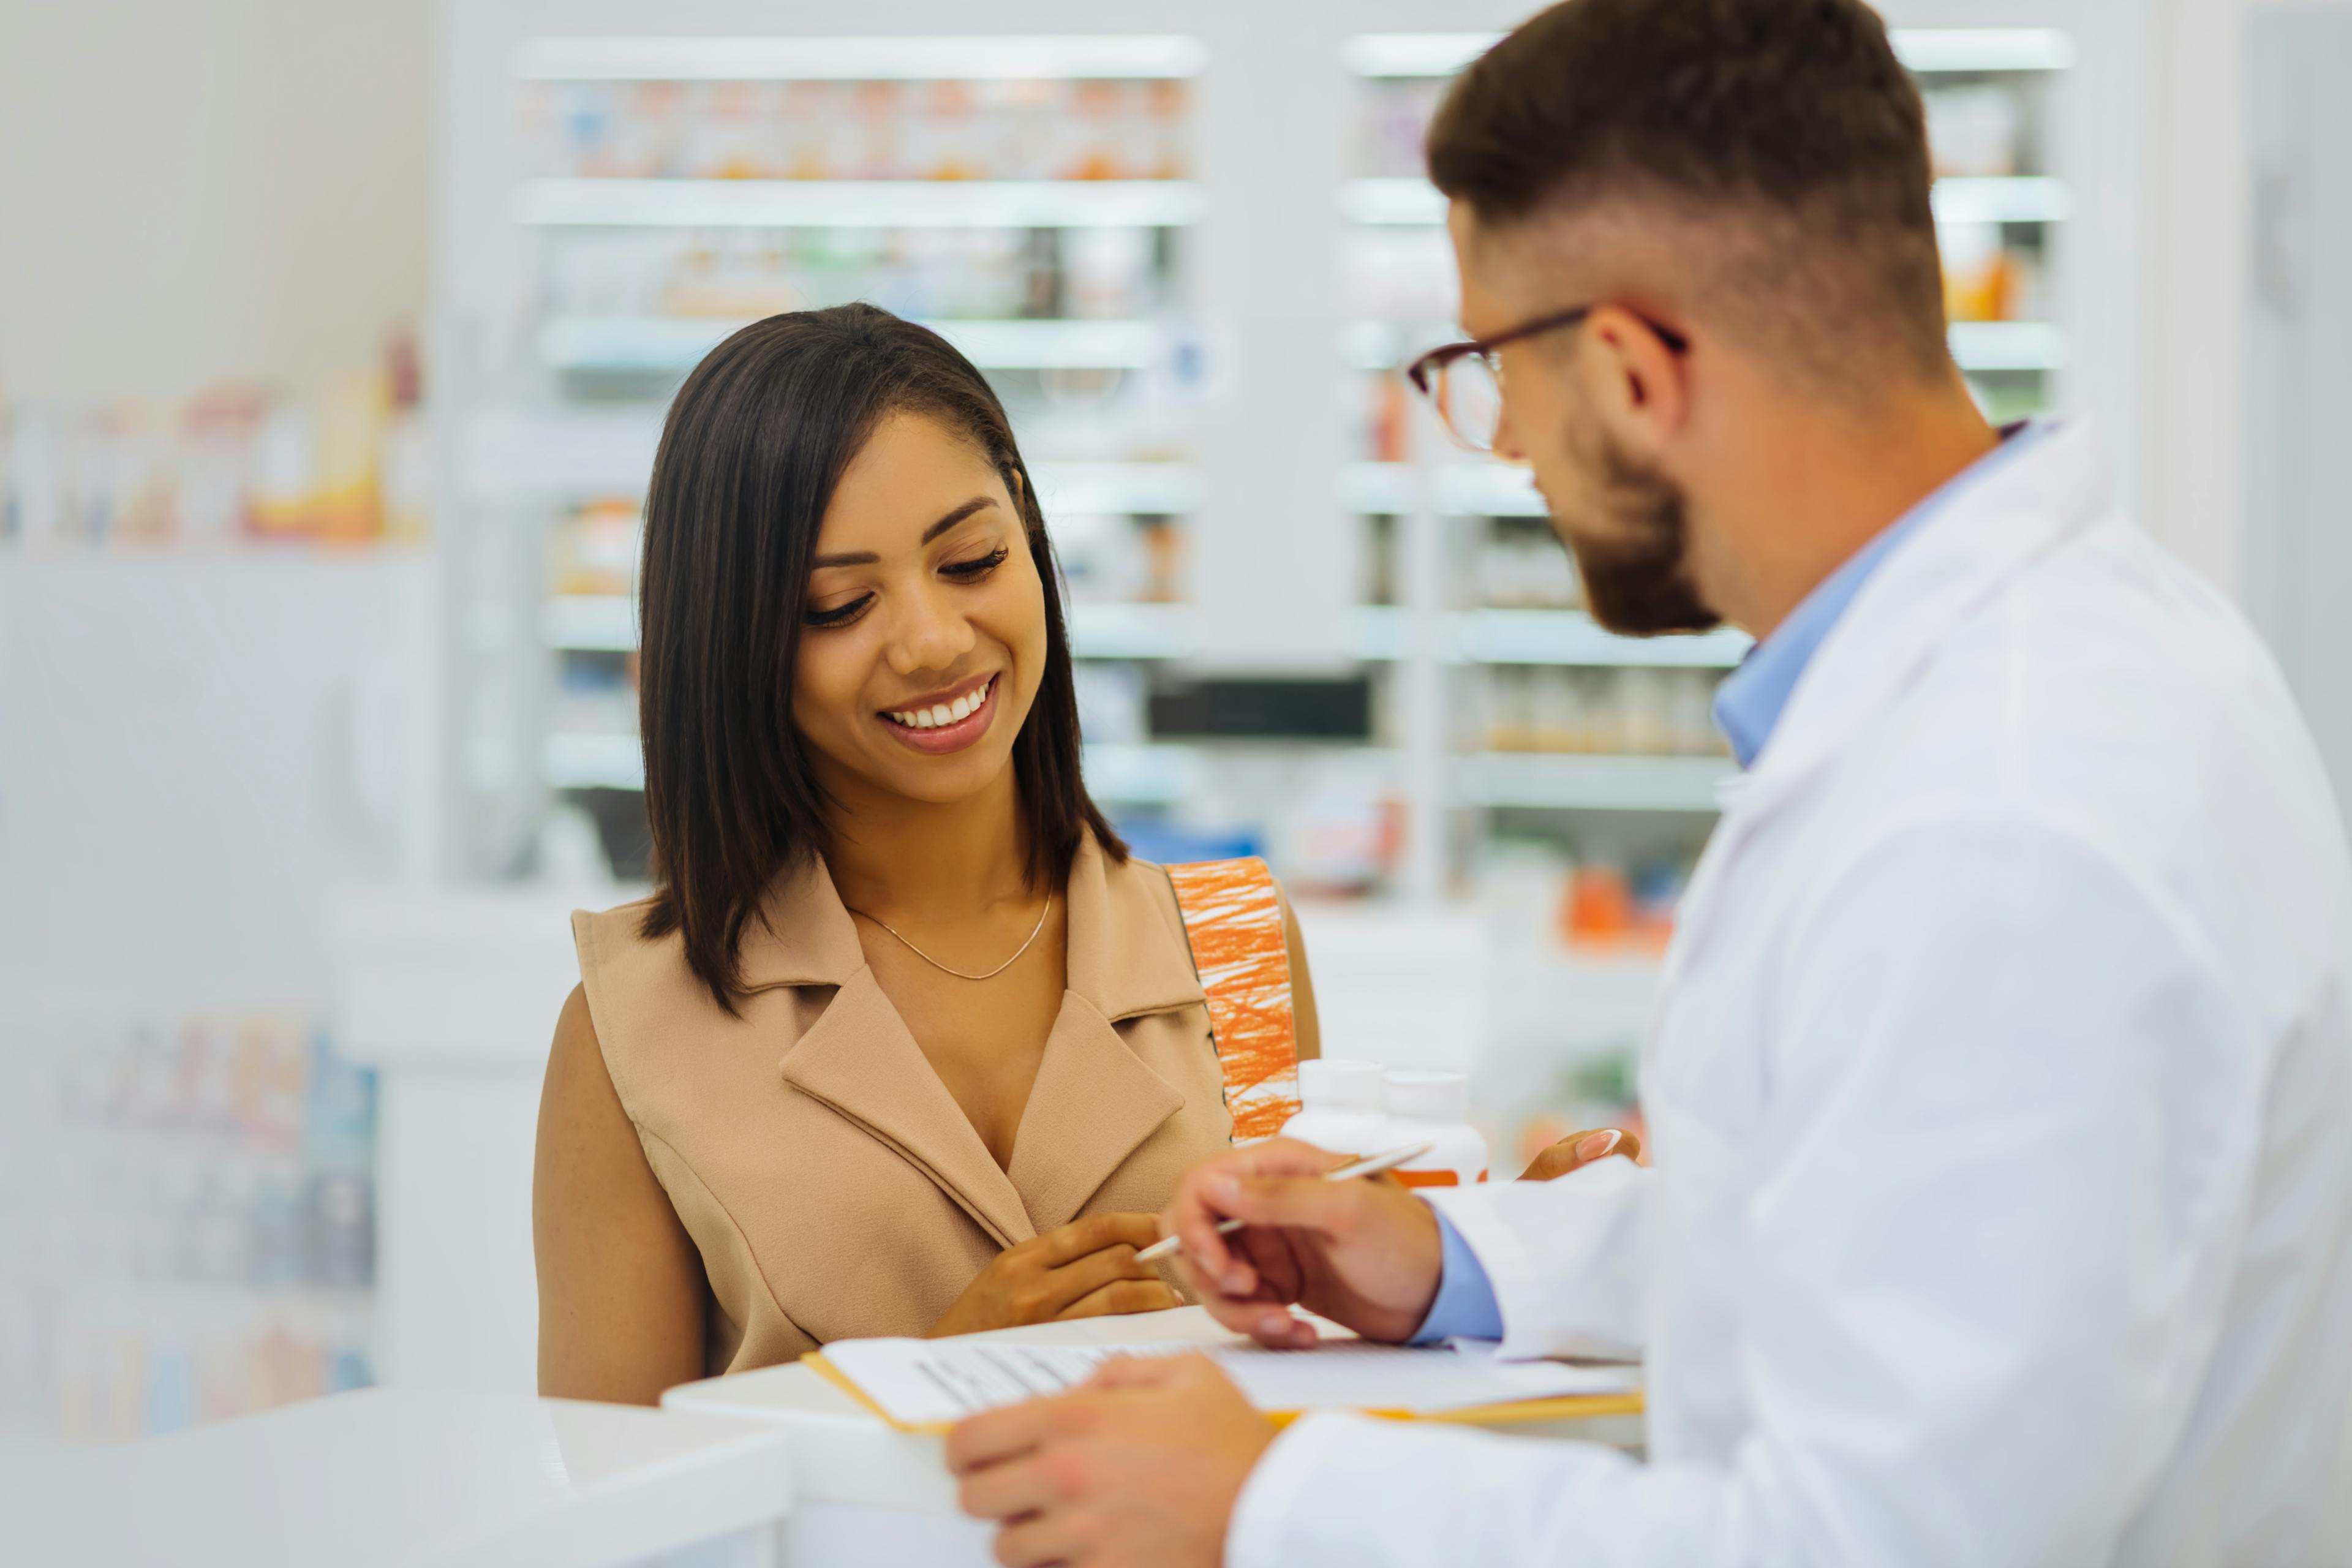 Dark-haired female. Cheerful girl expressing positivity while looking at prescription